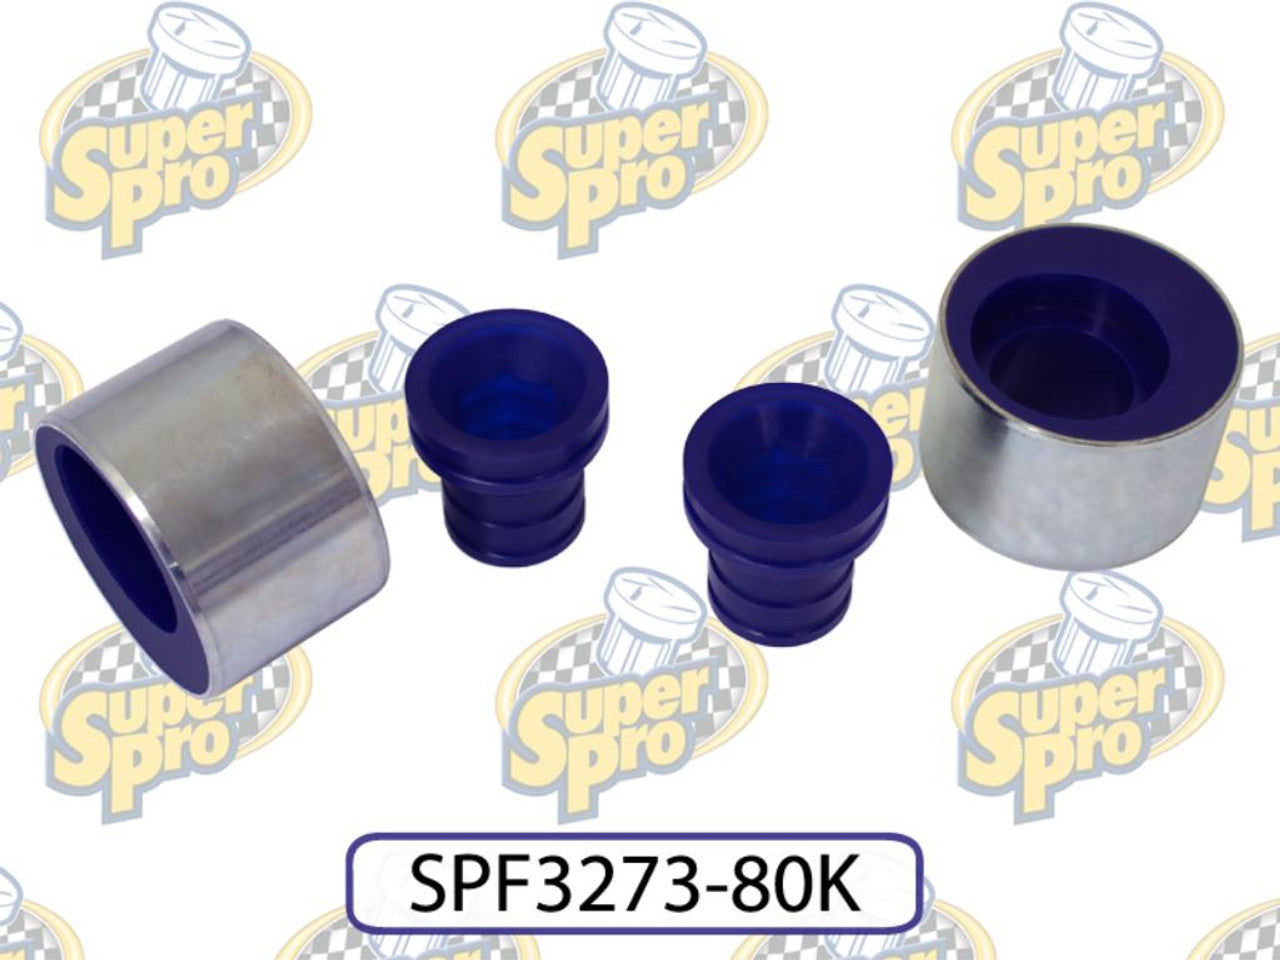 Superpro Front Control Arm Lower-Inner Rear Bush Kit: High-Performance Anti-Lift and Caster Increase Bush Kit - Golf MK5 2WD+4WD